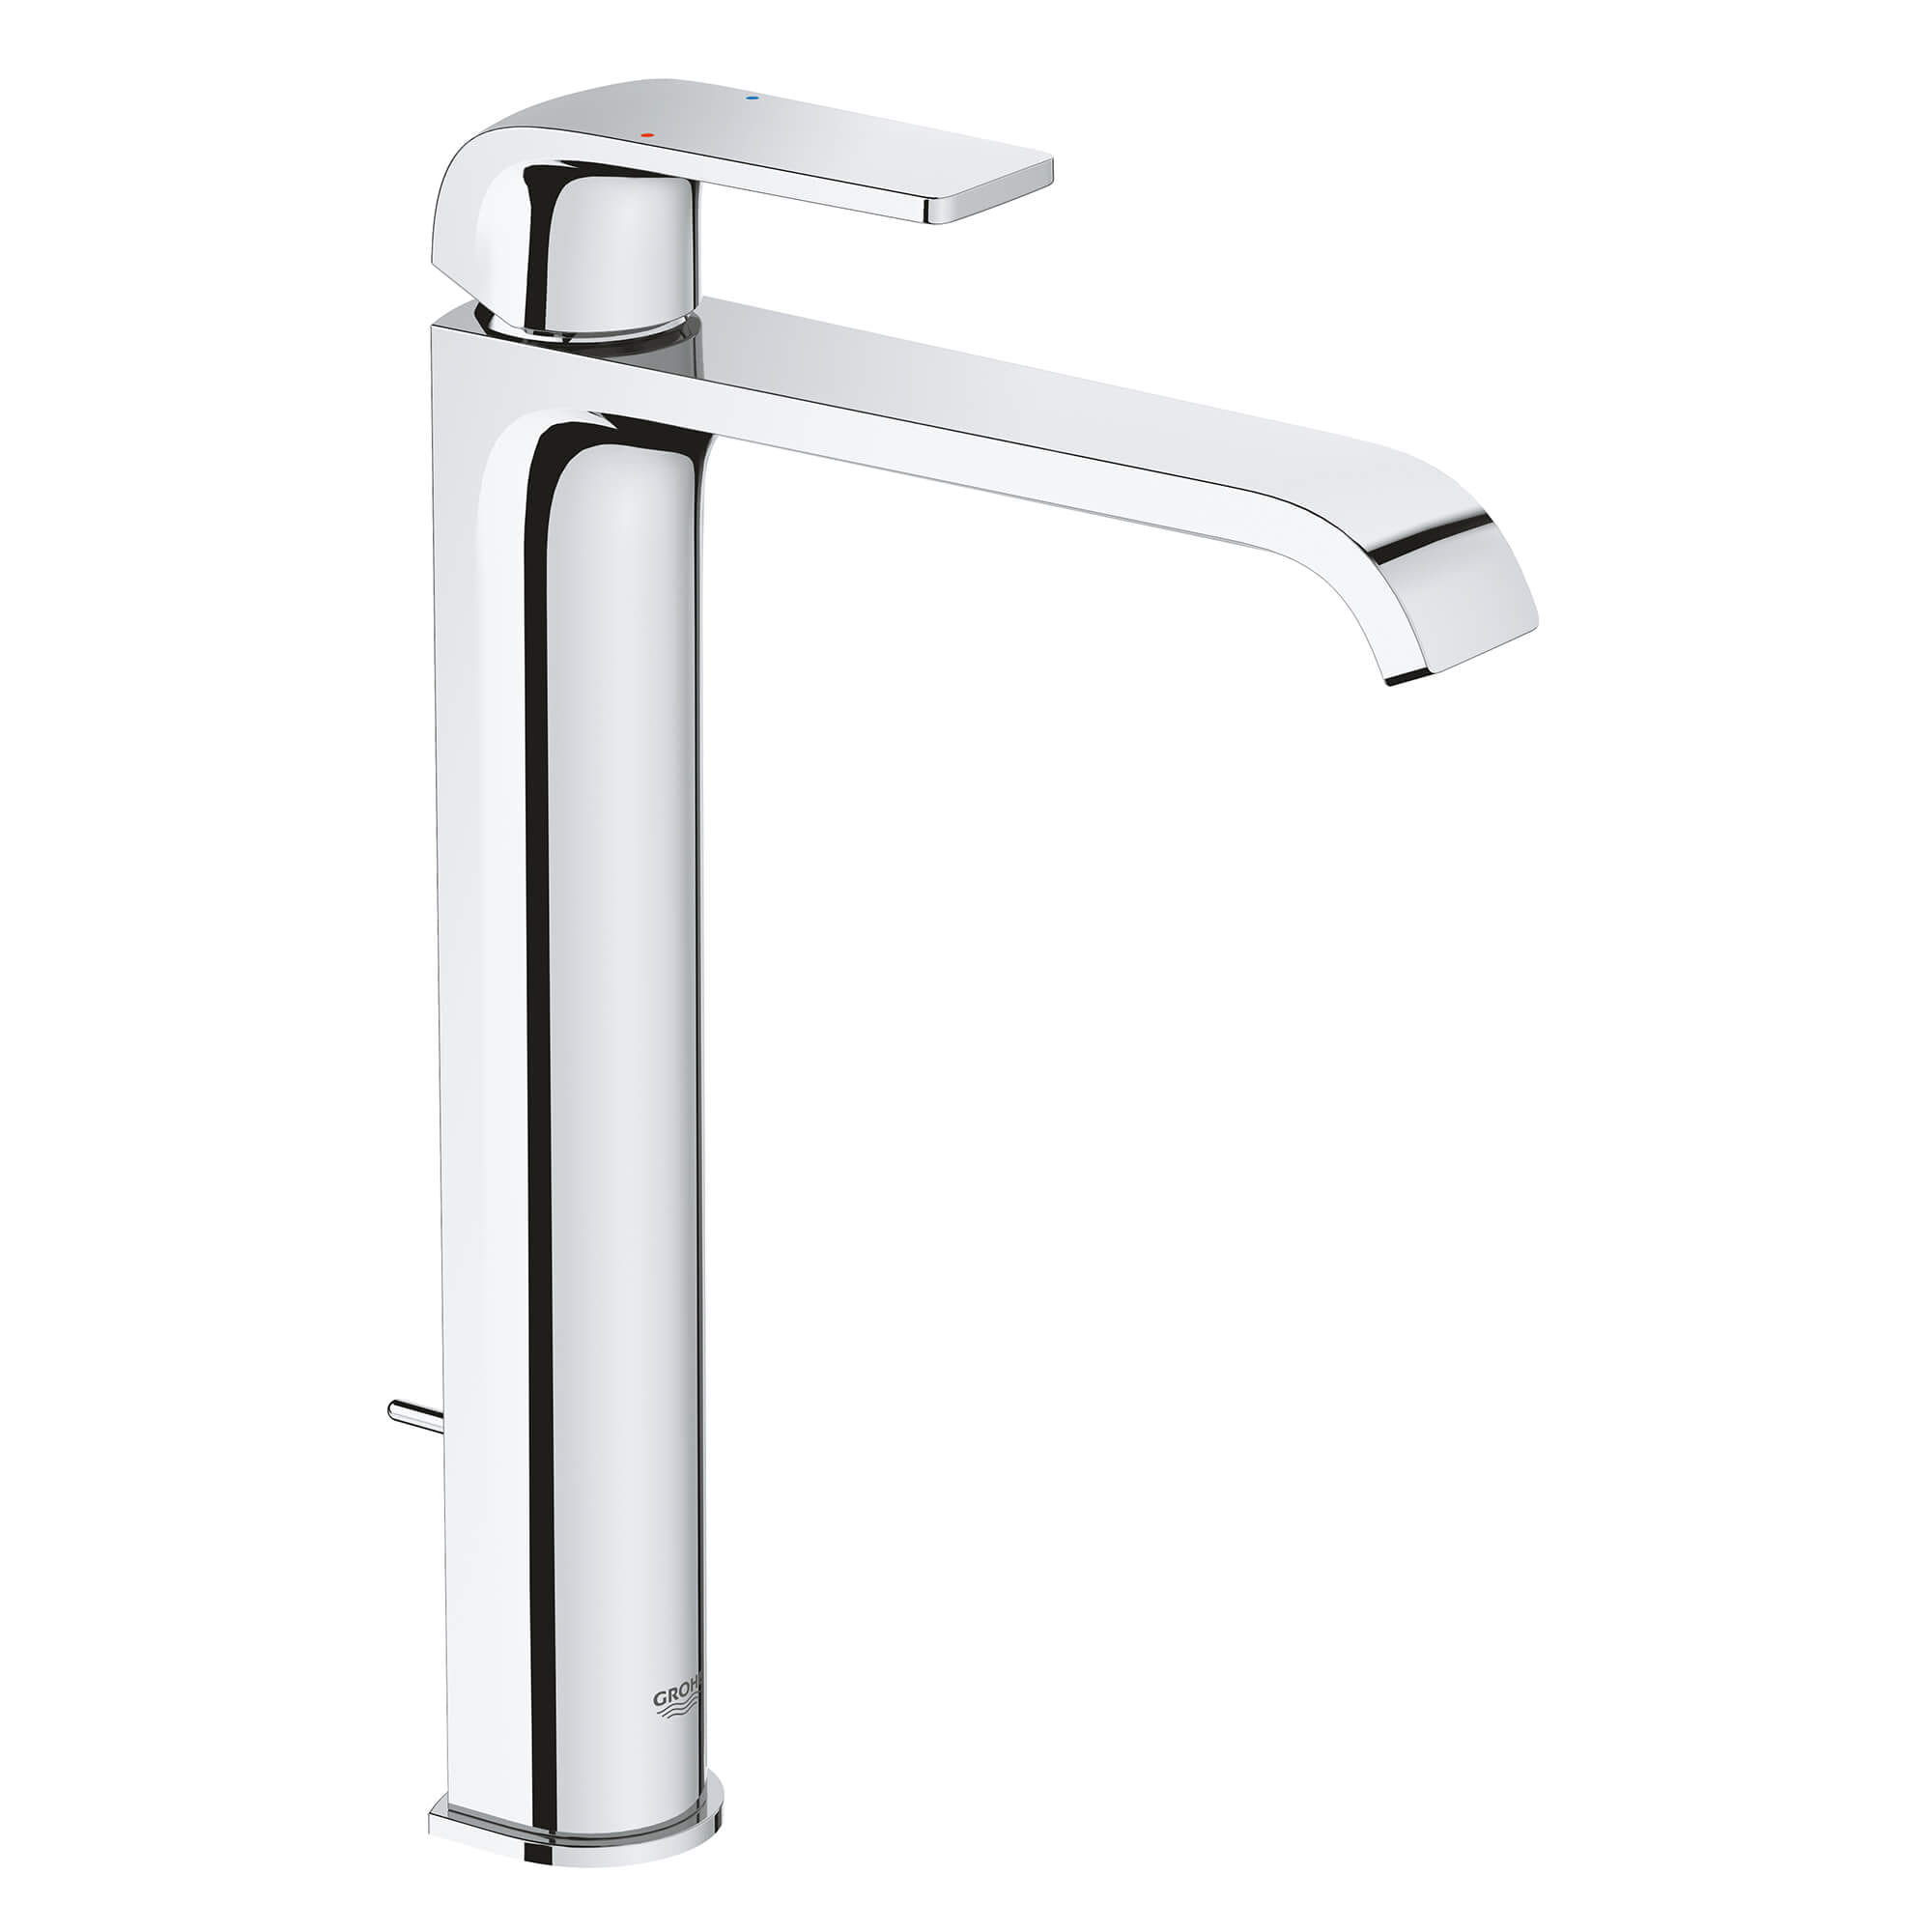 SINGLE HOLE SINGLE-HANDLE DECK MOUNT VESSEL SINK FAUCET 1.2 GPM-related